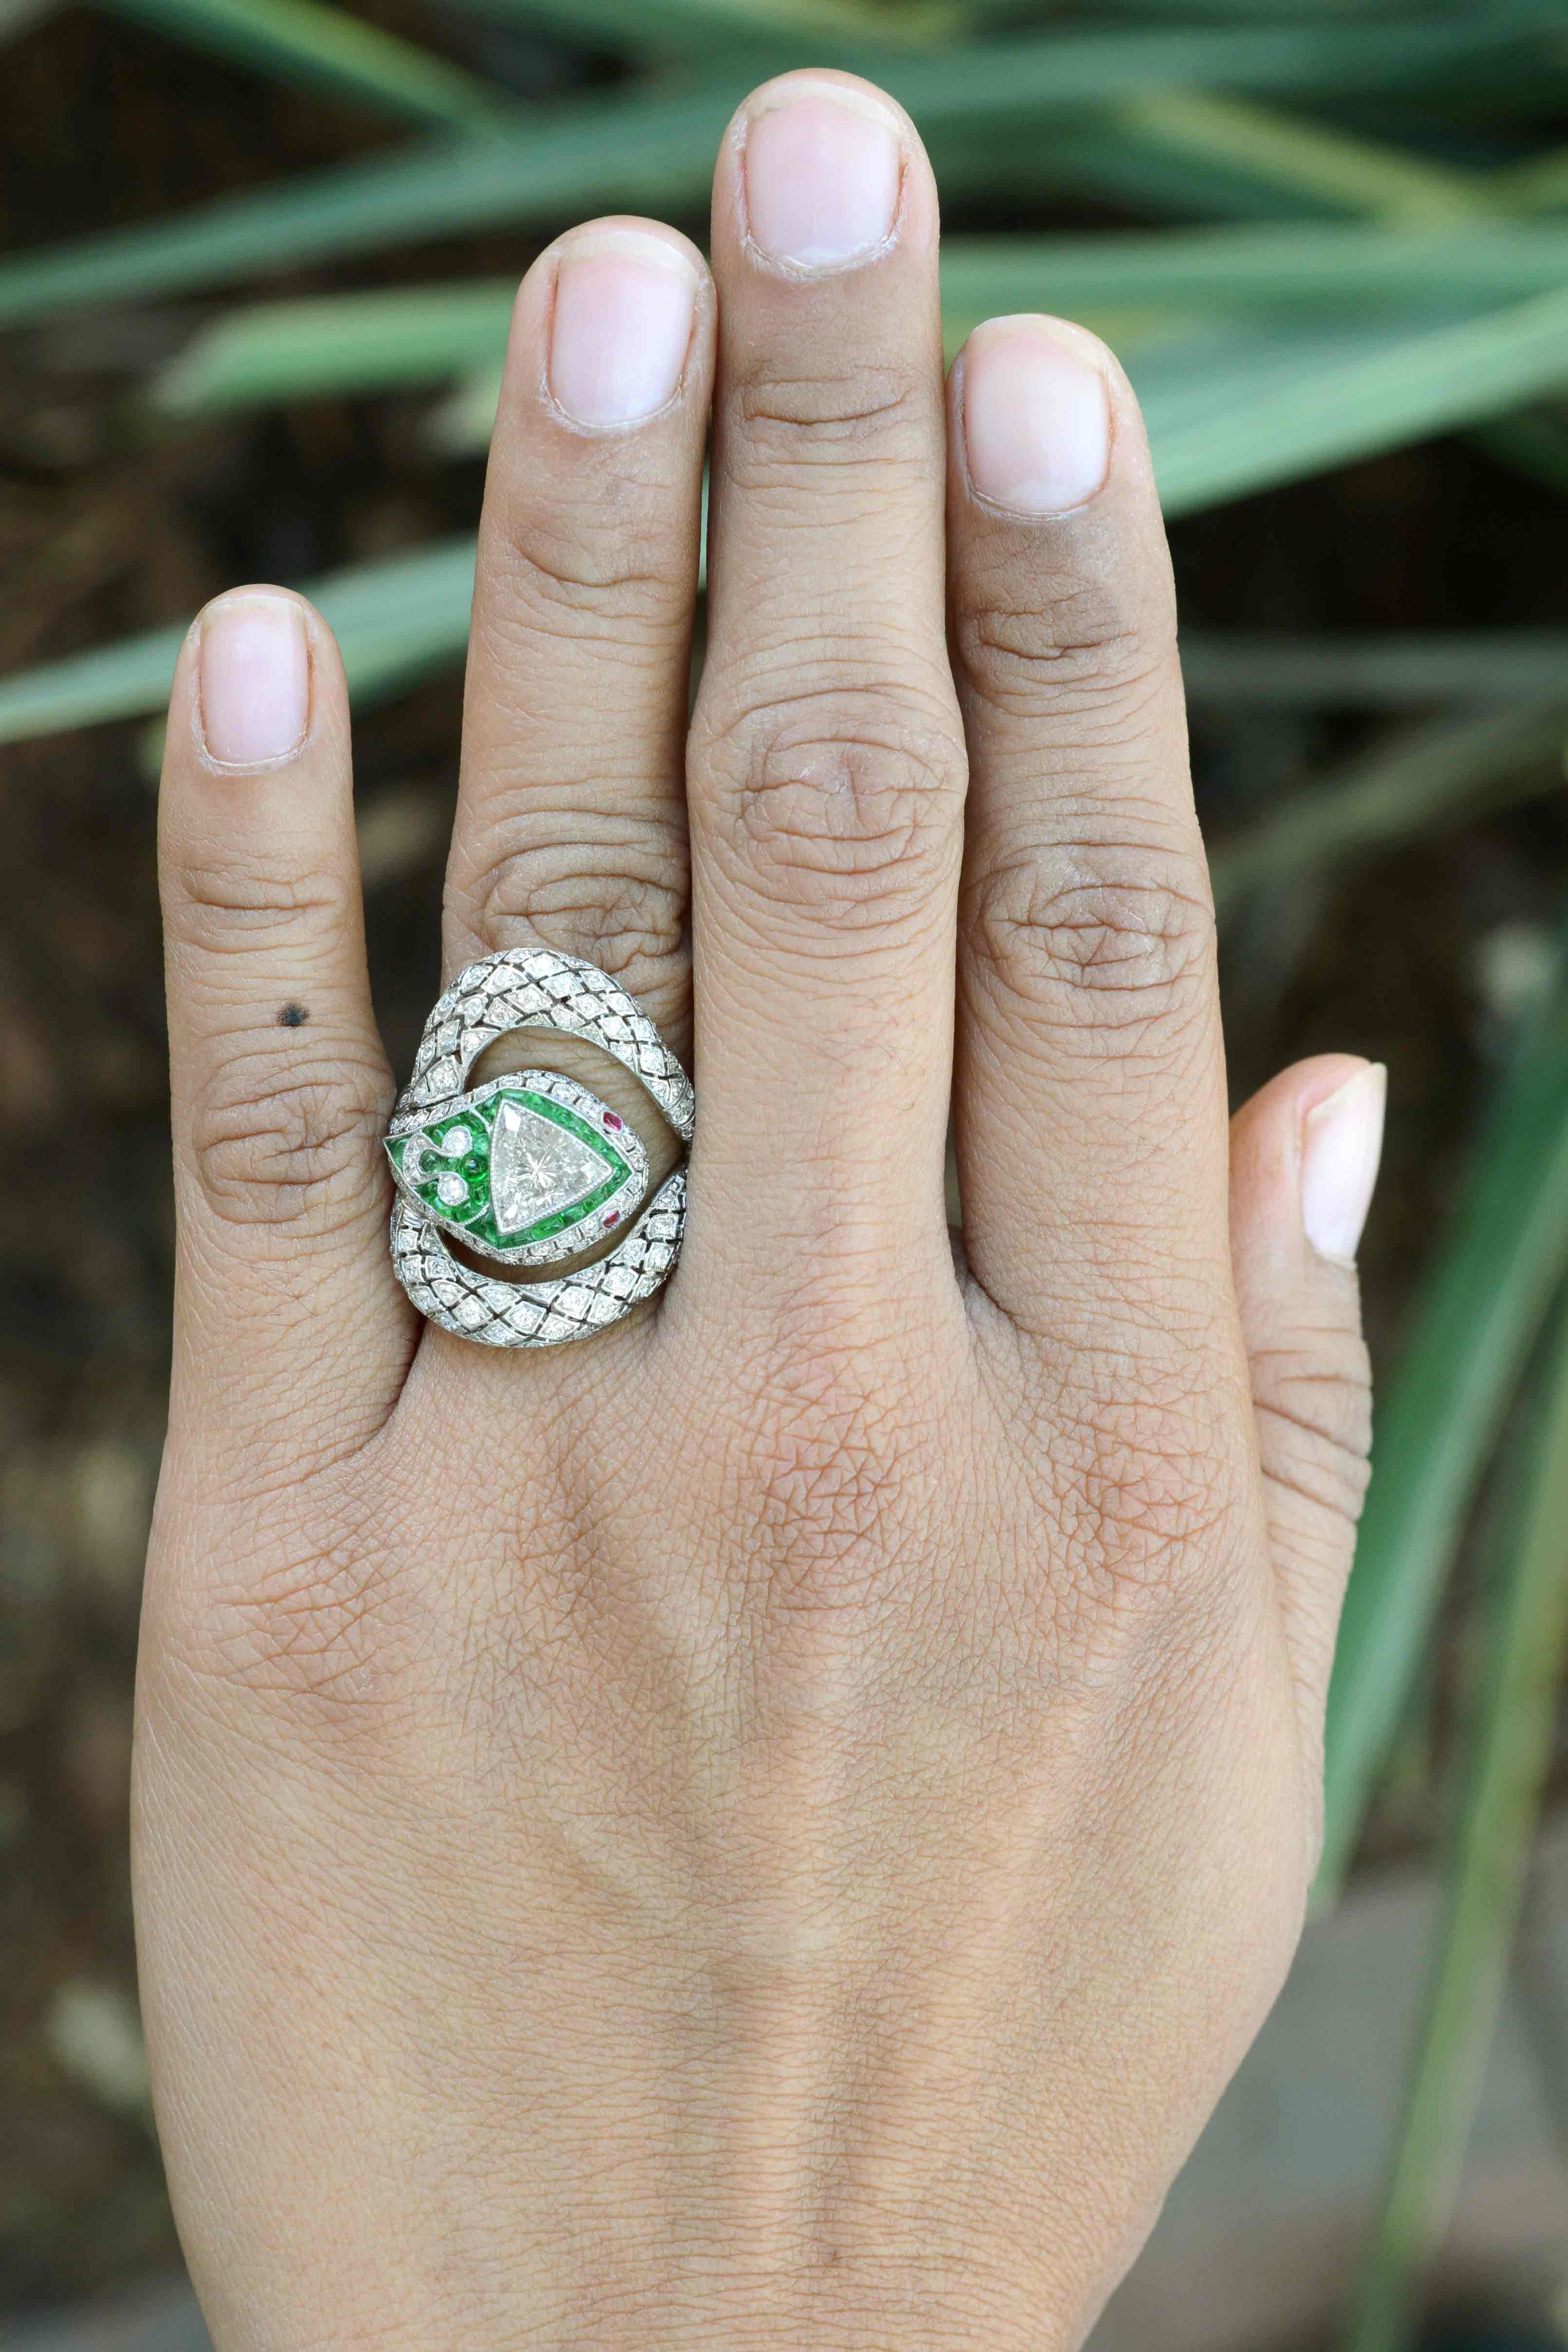 A fabulously elegant and charming Art Deco Style snake ring. Centered by a 1.17 carat triangle diamond (trillion) of a scintillatingly brilliant personality wrapped in lush emeralds, diamond encrusted scales and haunting ruby eyes. This Egyptian